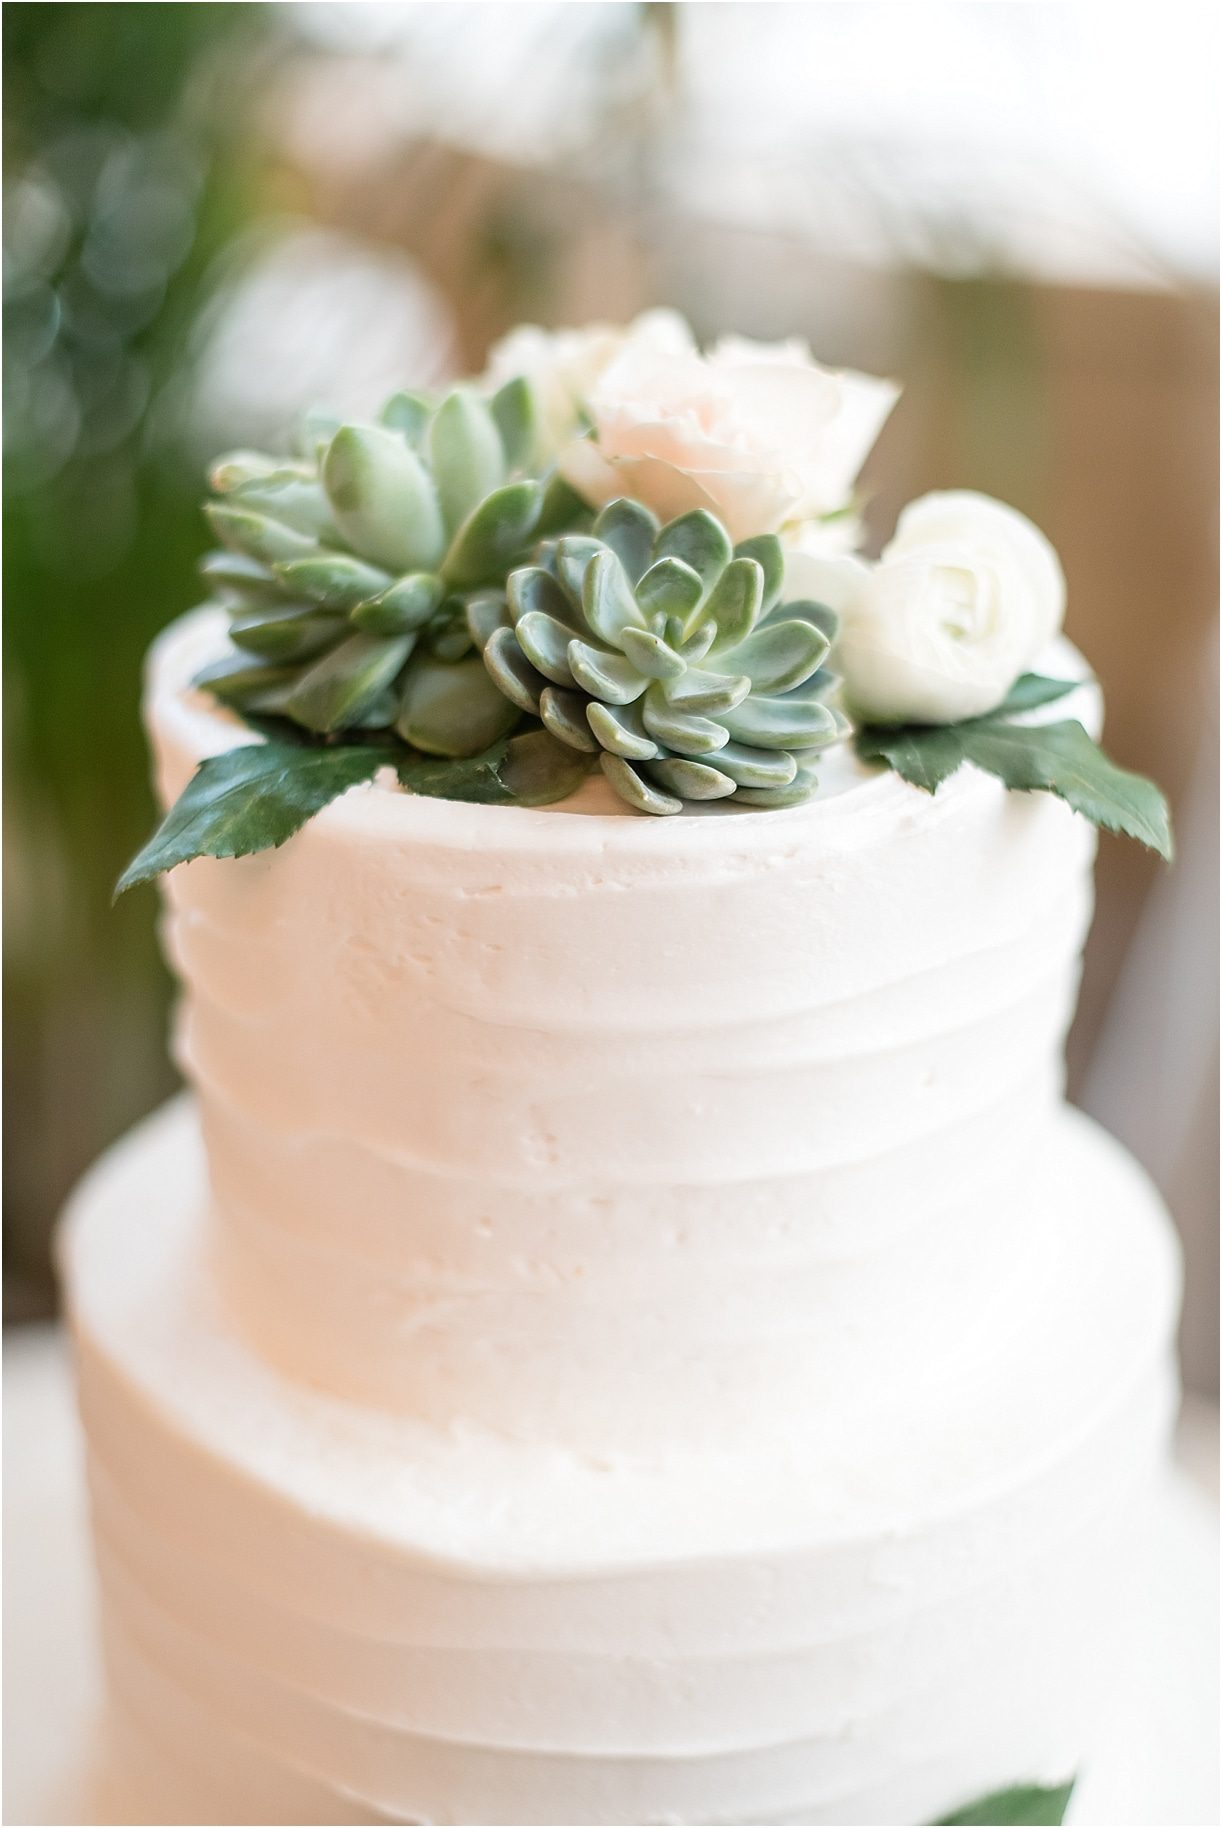 Sophisticated Richmond Wedding in Virginia as seen on Hill City Bride by Melissa Desjardins Photography Succulent Cake